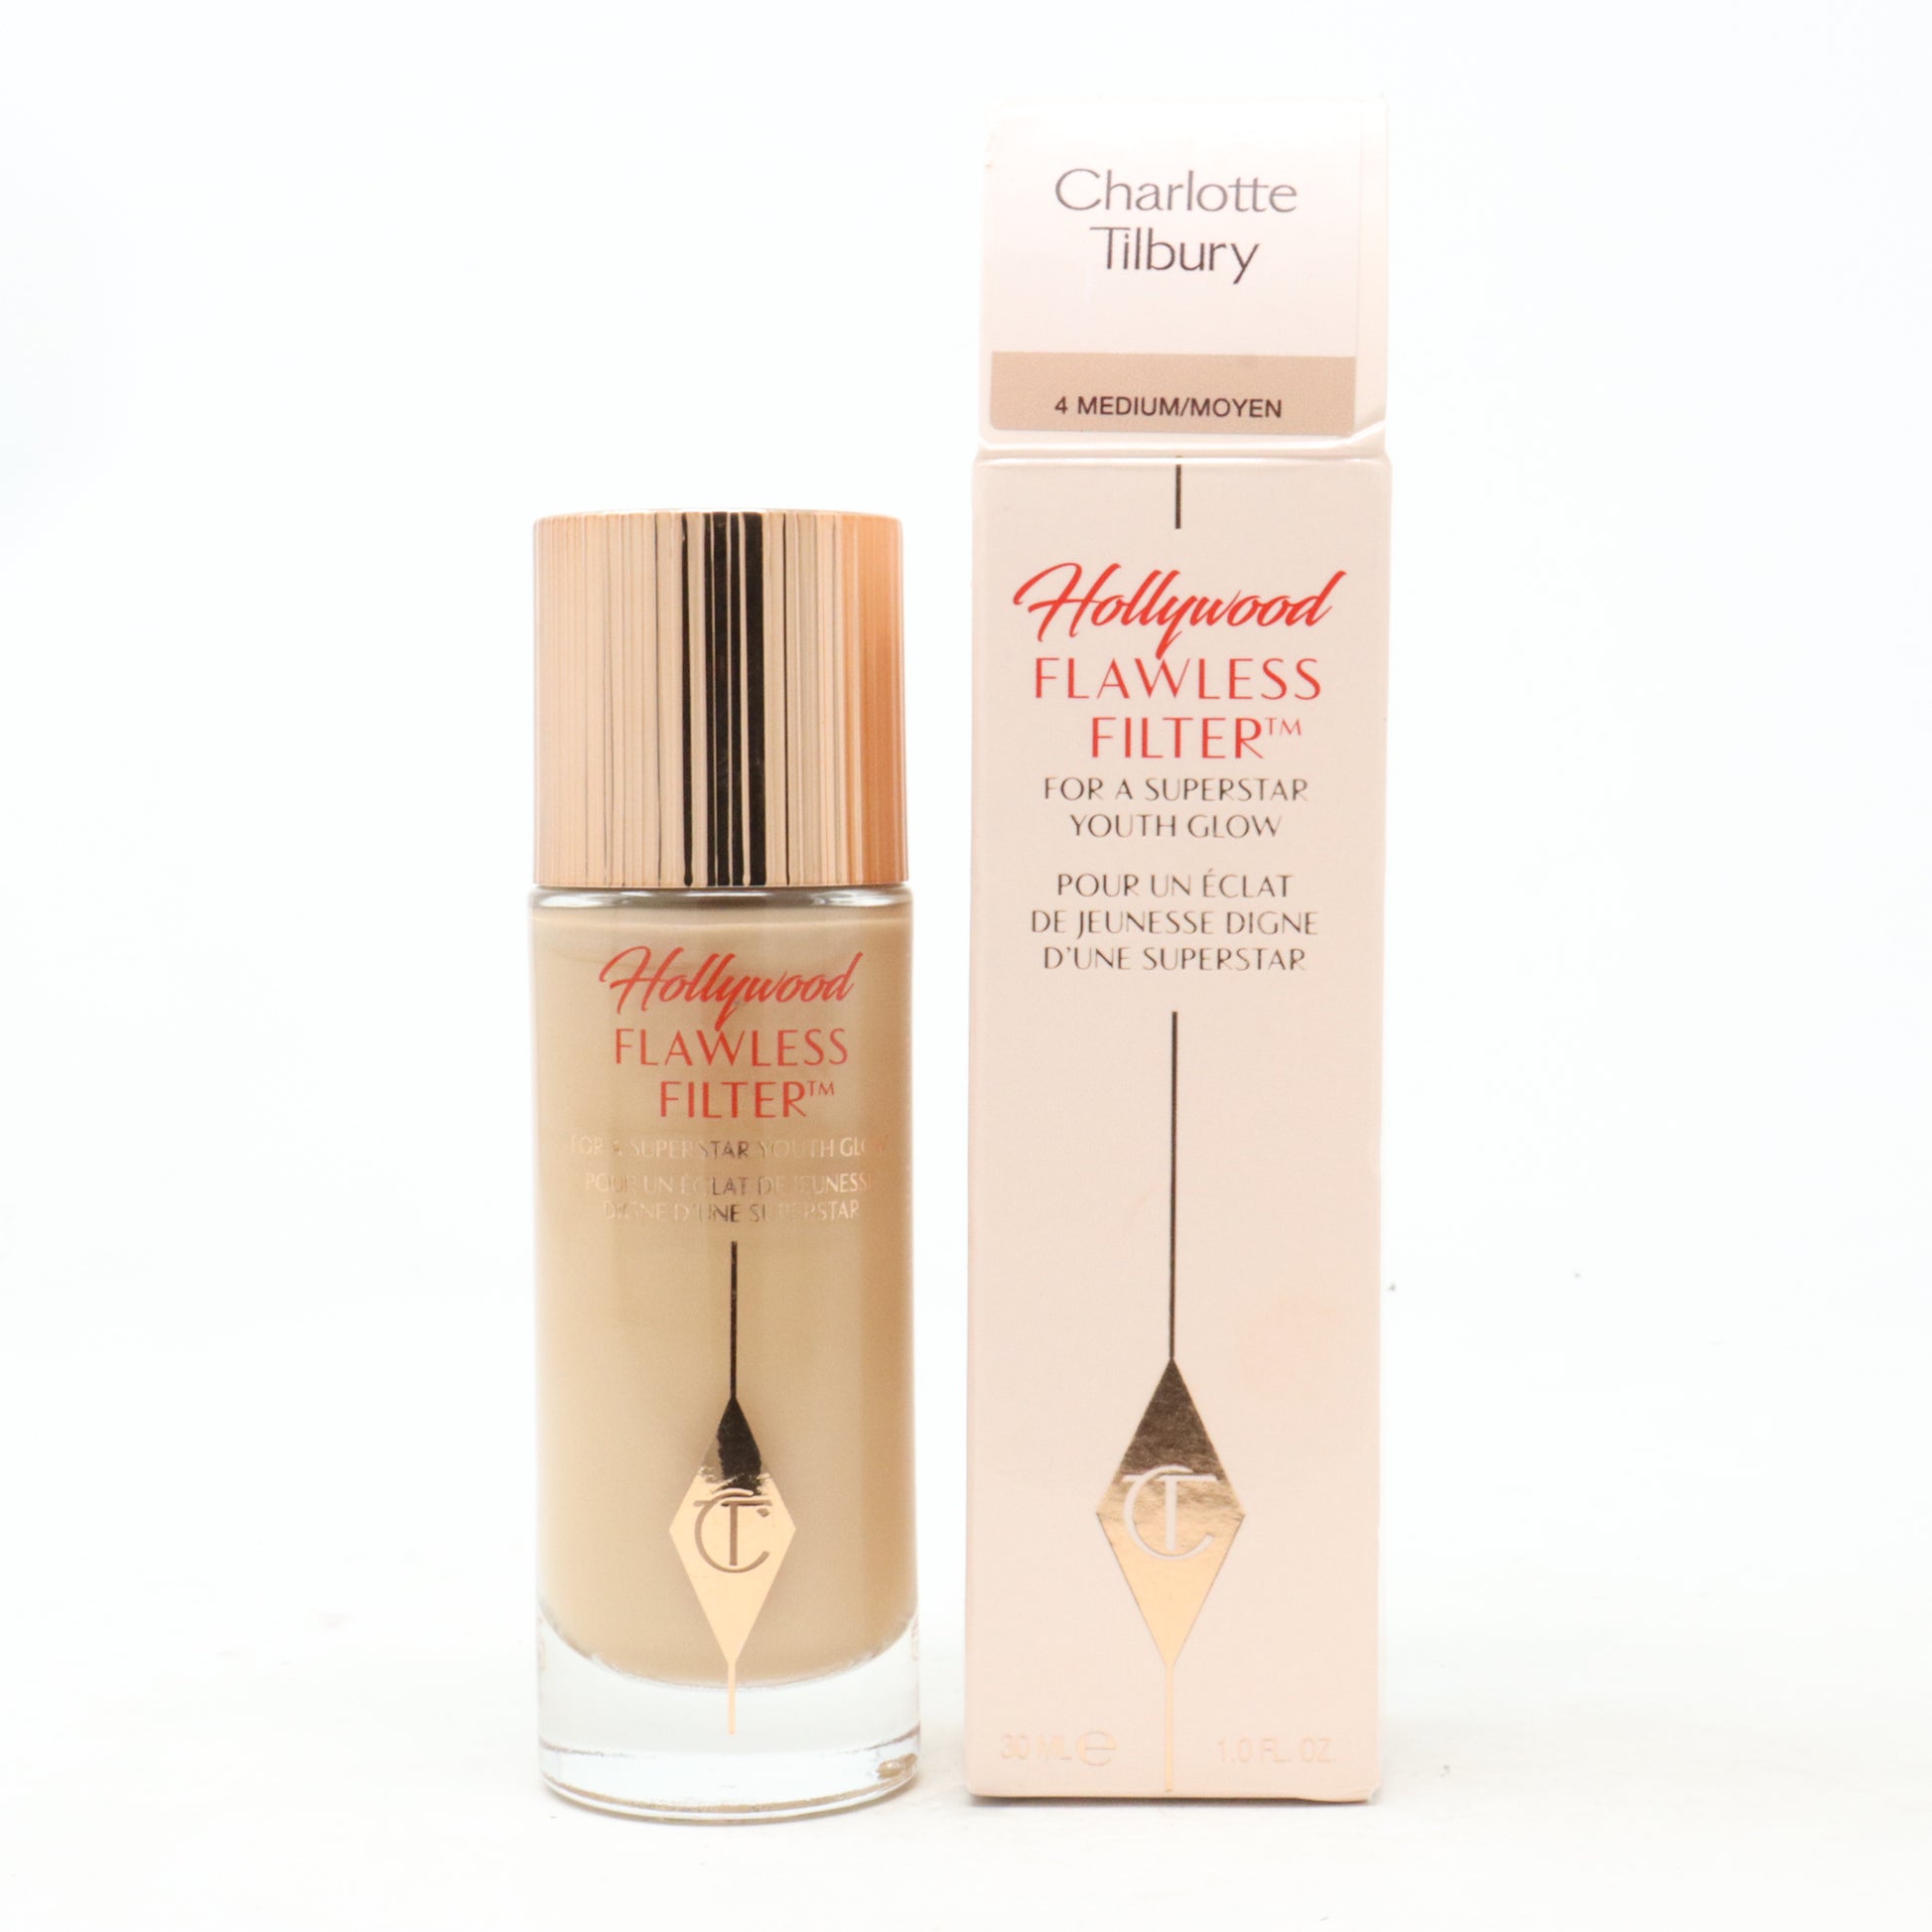 Flawless Filter For A Superstar Youth Glow 30 ml